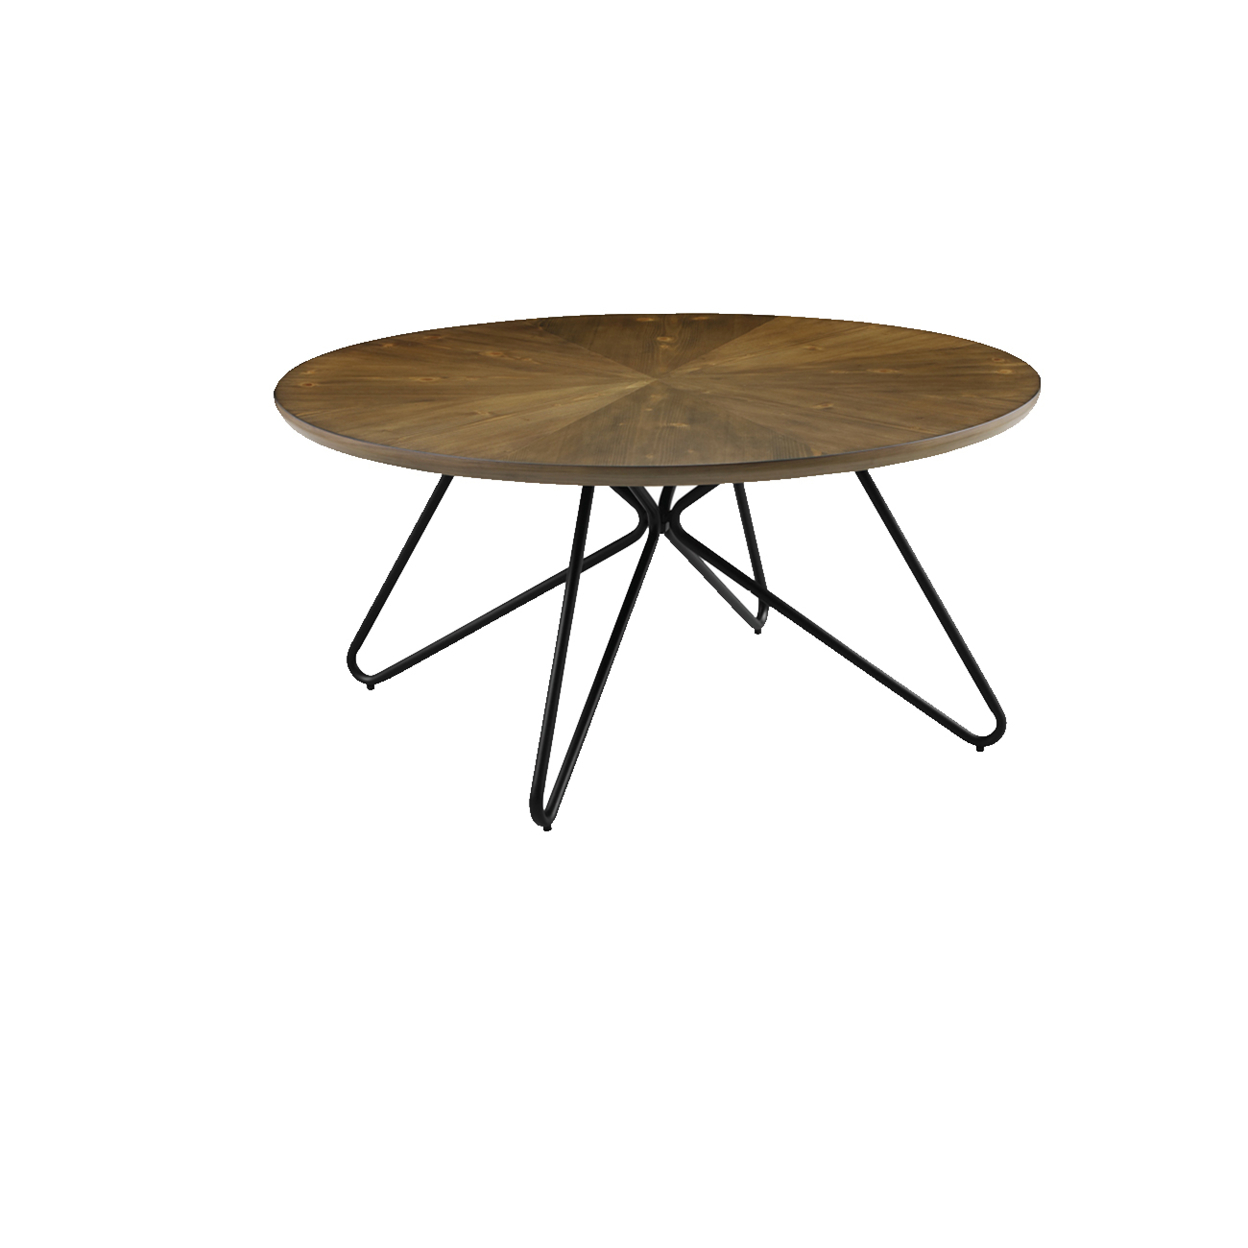 Dual Tone Round Wooden Coffee Table With Metal Hairpin Legs,Brown And Black- Saltoro Sherpi